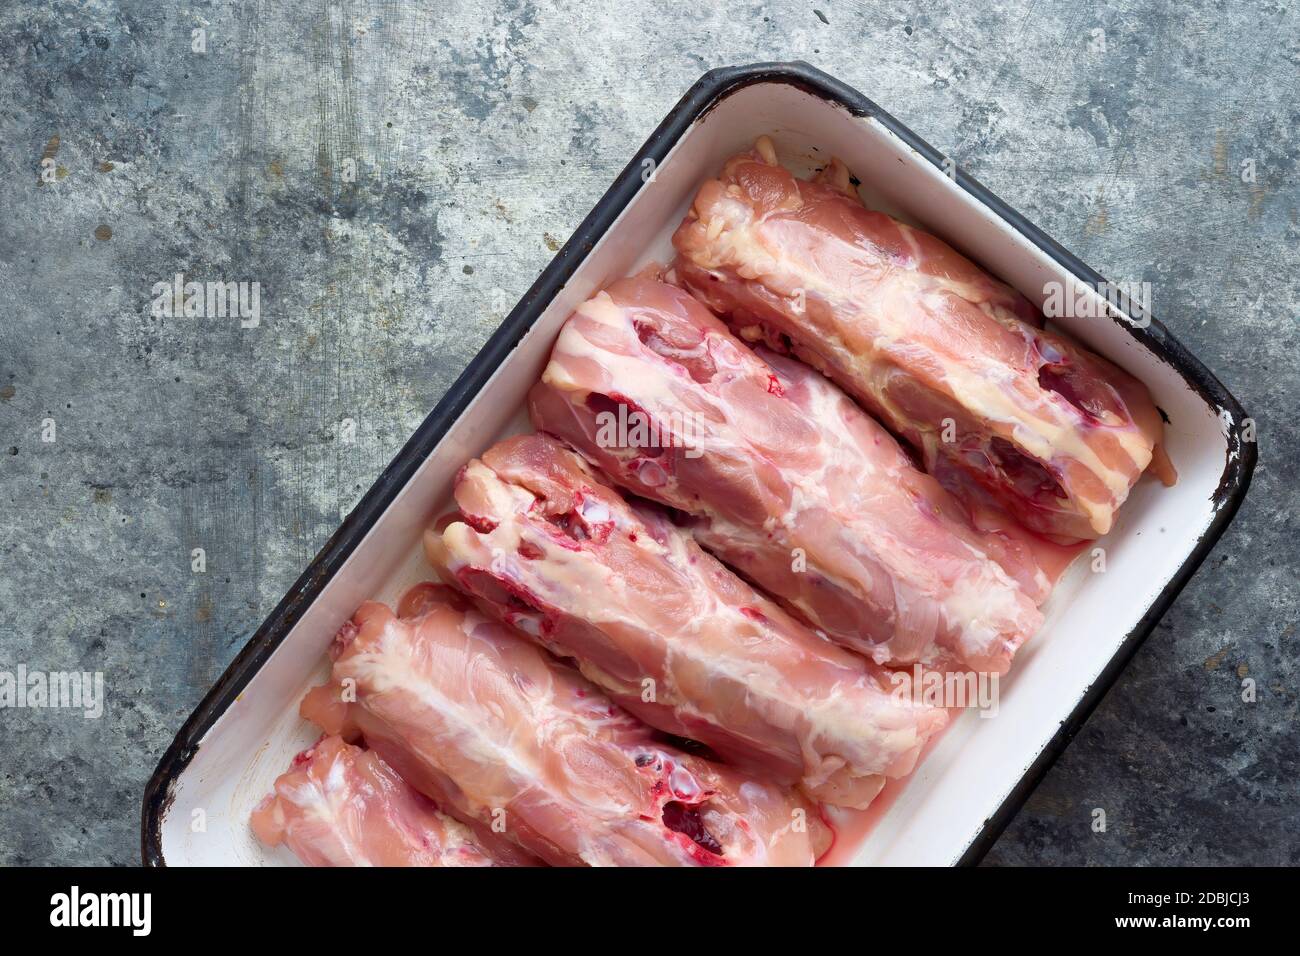 close up of rustic chicken bone carcass soup ingredient Stock Photo